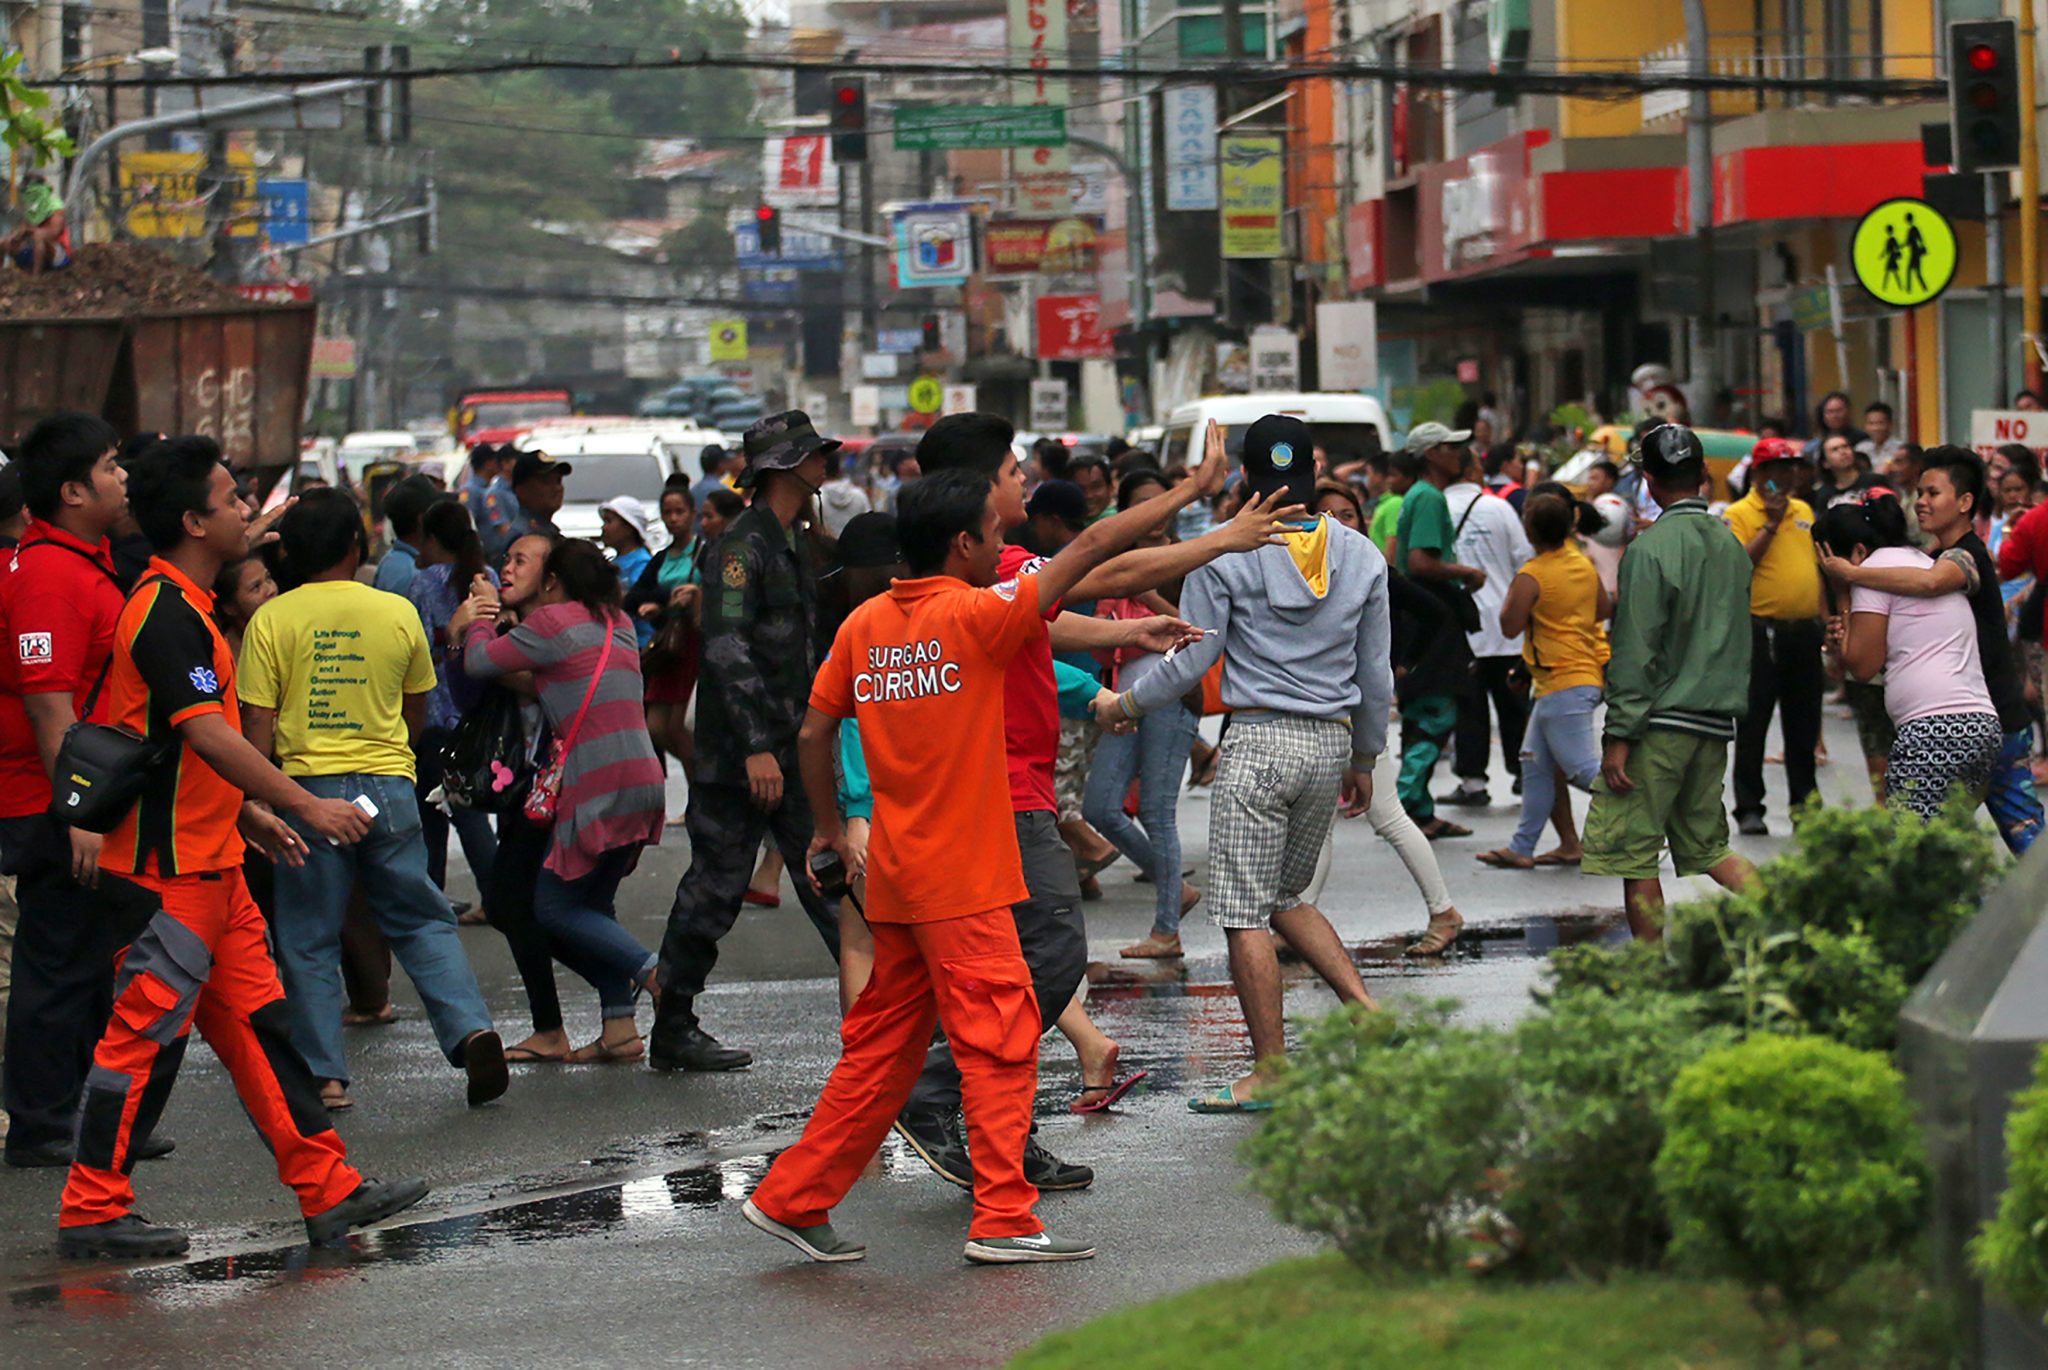 Residents run to a main road as rescuers (in orange) give instructions as strong after-shocks struck, prior to the arrival of Philippine President Rodrigo Duterte in Surigao City, in southern island of Mindanao on February 12, 2017, days after a 6.5-magnitude earthquake hit the city. Duterte flew to the region on February 12, to inspect the response effort, which officials said has shifted to relief and rehabilitation after the last of the dead and injured were pulled from the rubble. / AFP PHOTO / ERWIN MASCARINAS